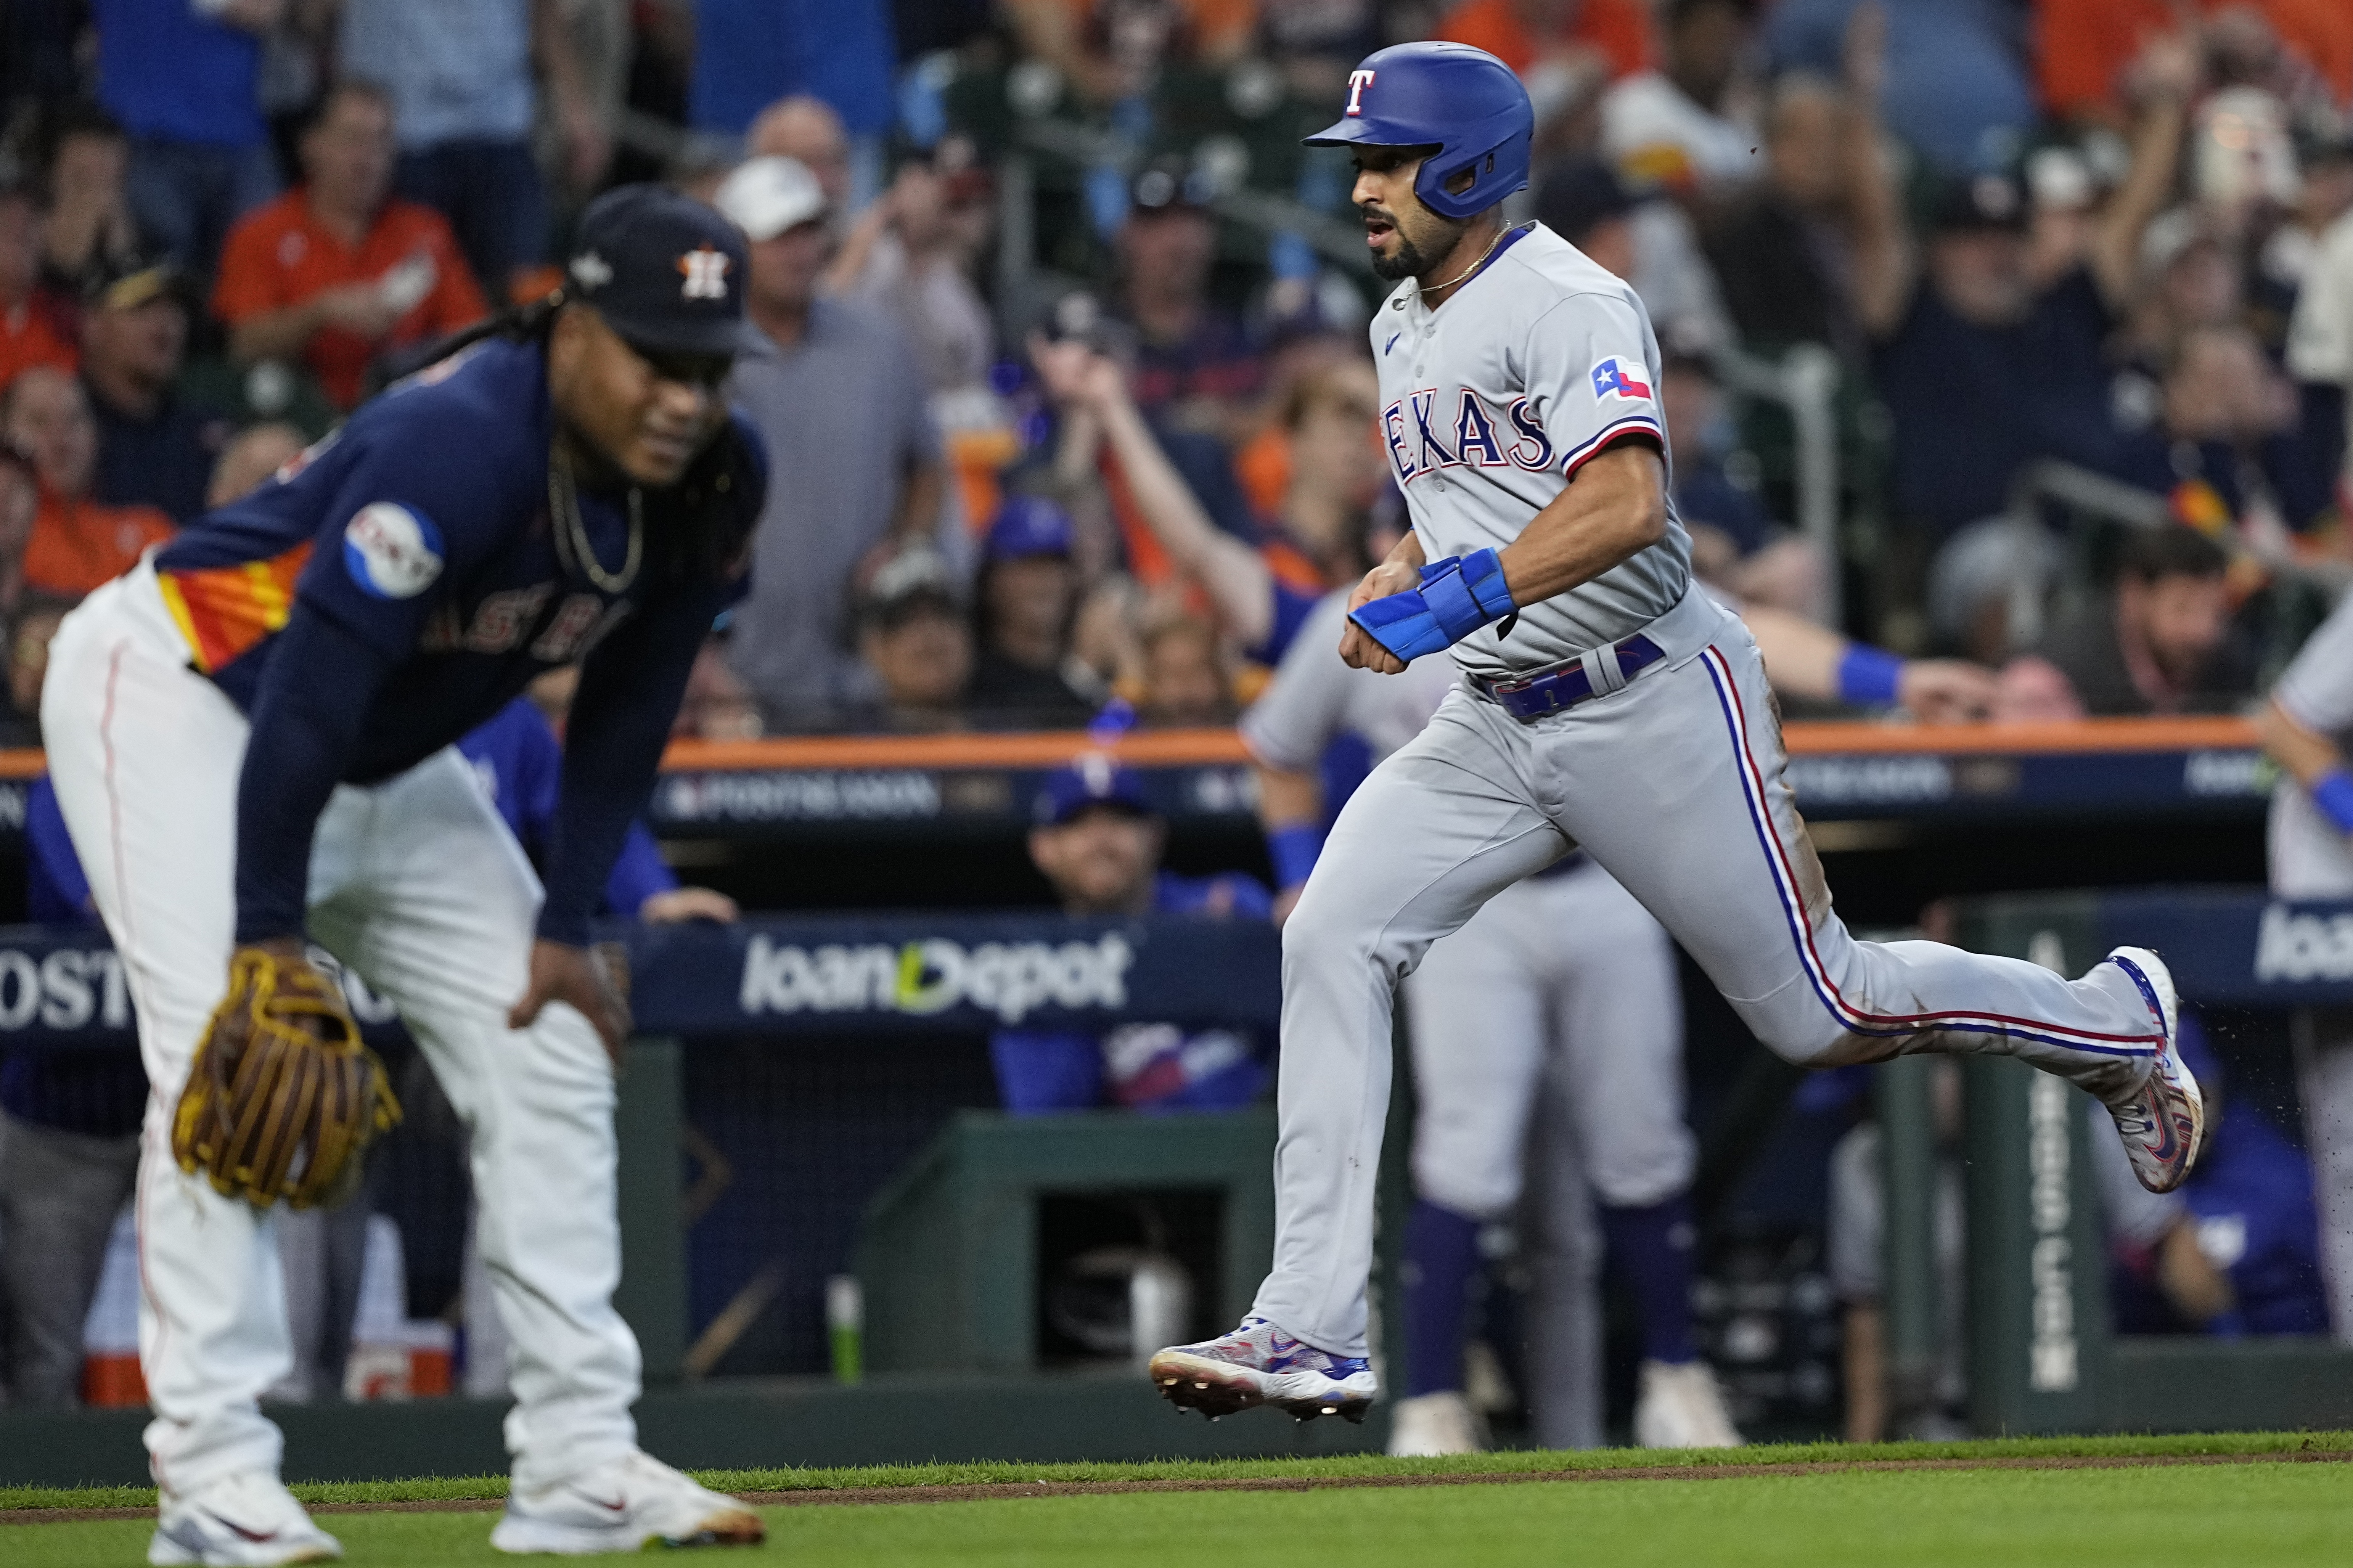 MLB playoffs: Astros awaken with ALCS Game 3 conquest over Rangers